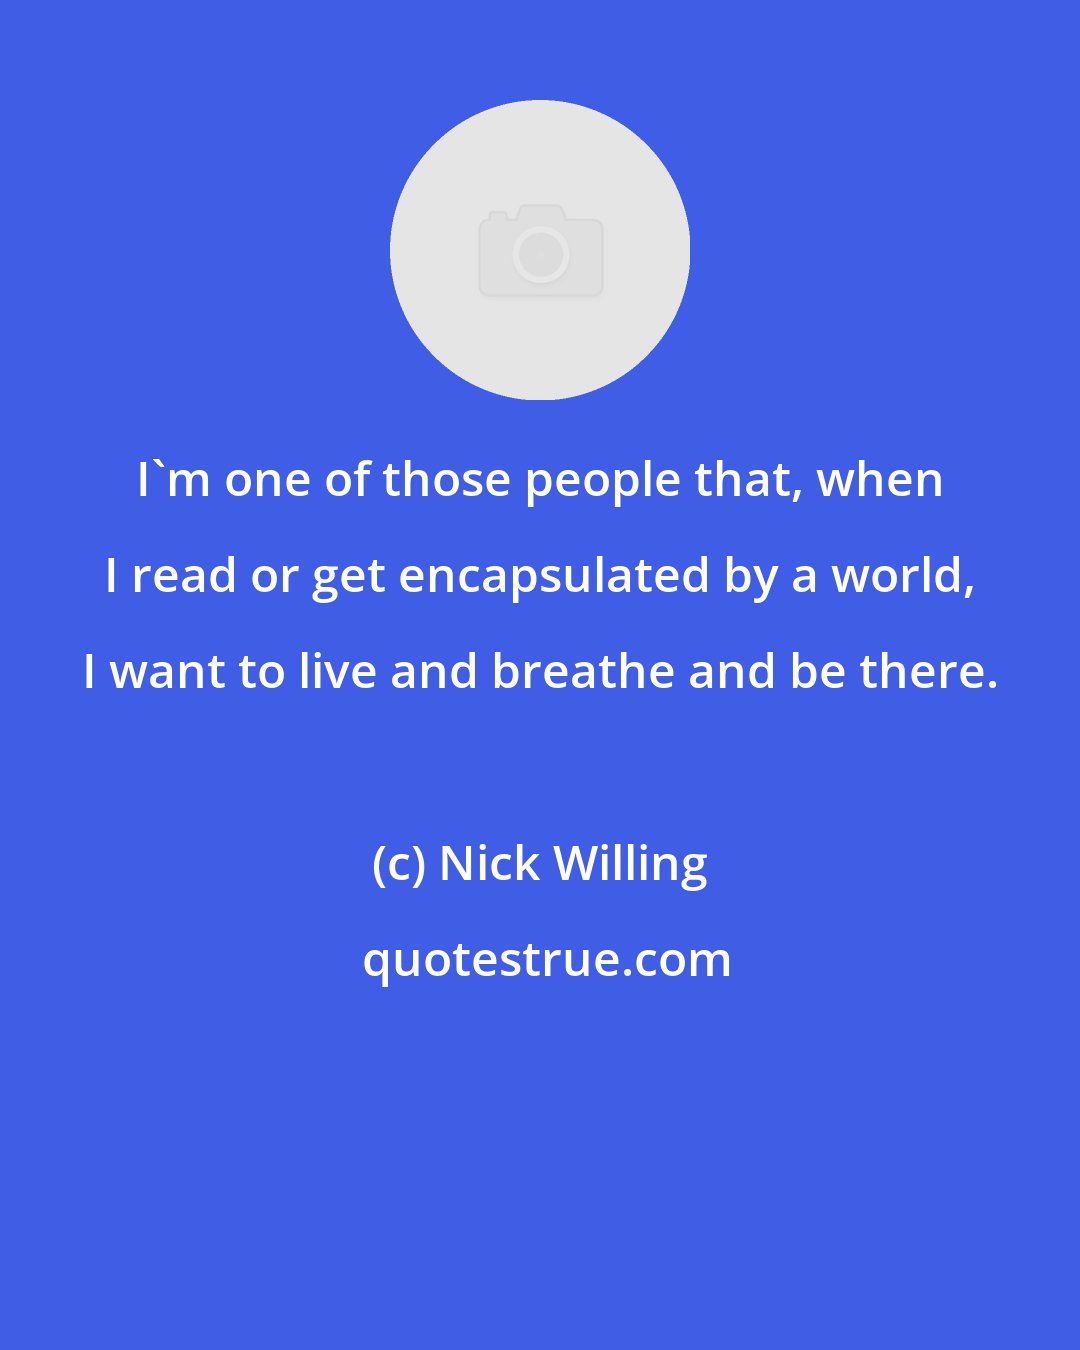 Nick Willing: I'm one of those people that, when I read or get encapsulated by a world, I want to live and breathe and be there.